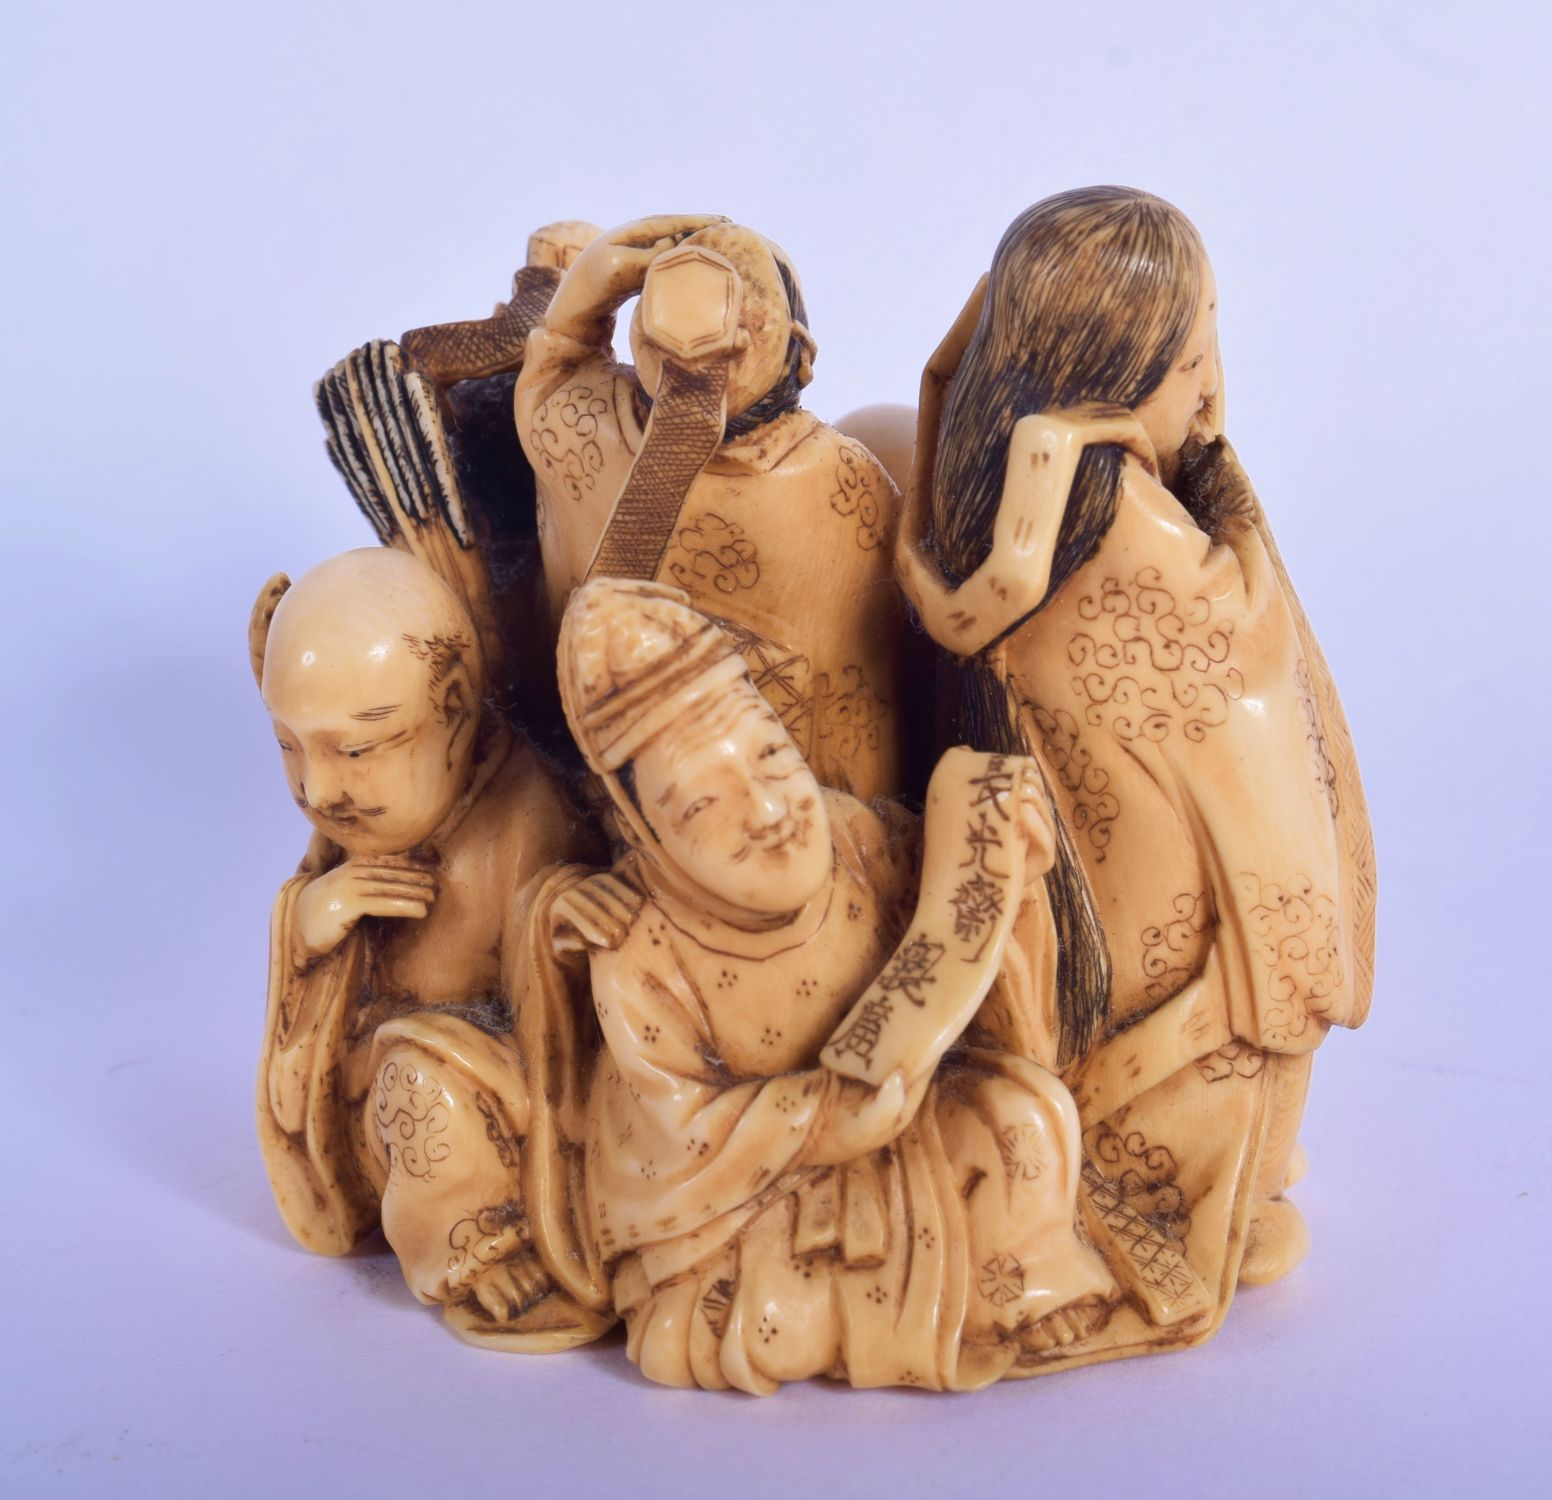 A FINE 19TH CENTURY JAPANESE MEIJI PERIOD CARVED IVORY OKIMONO modelled as various figures, includin - Image 3 of 5